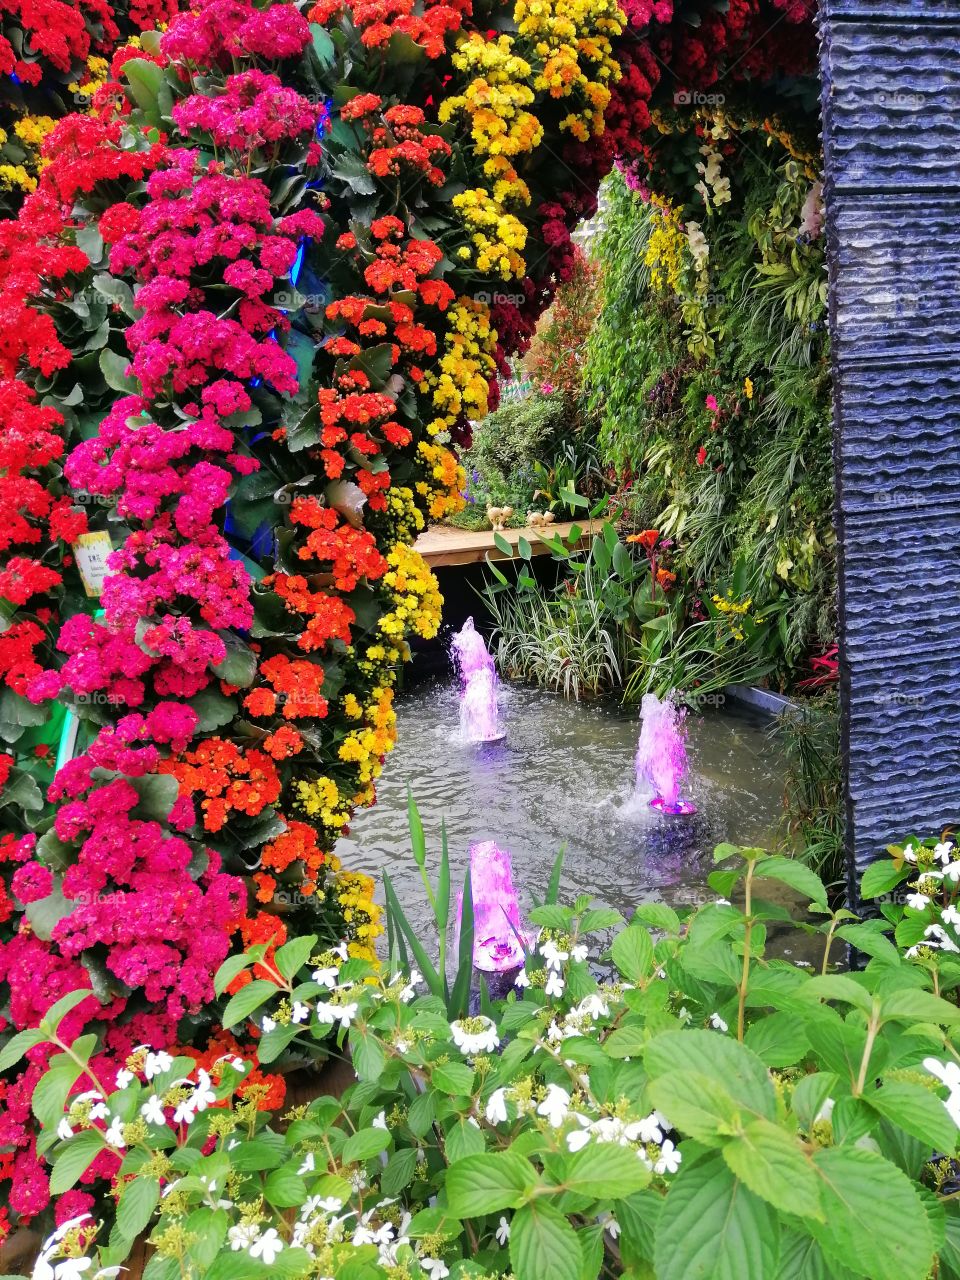 This photo taken during a flower show. There are lots of different kinds and colorful flowers.